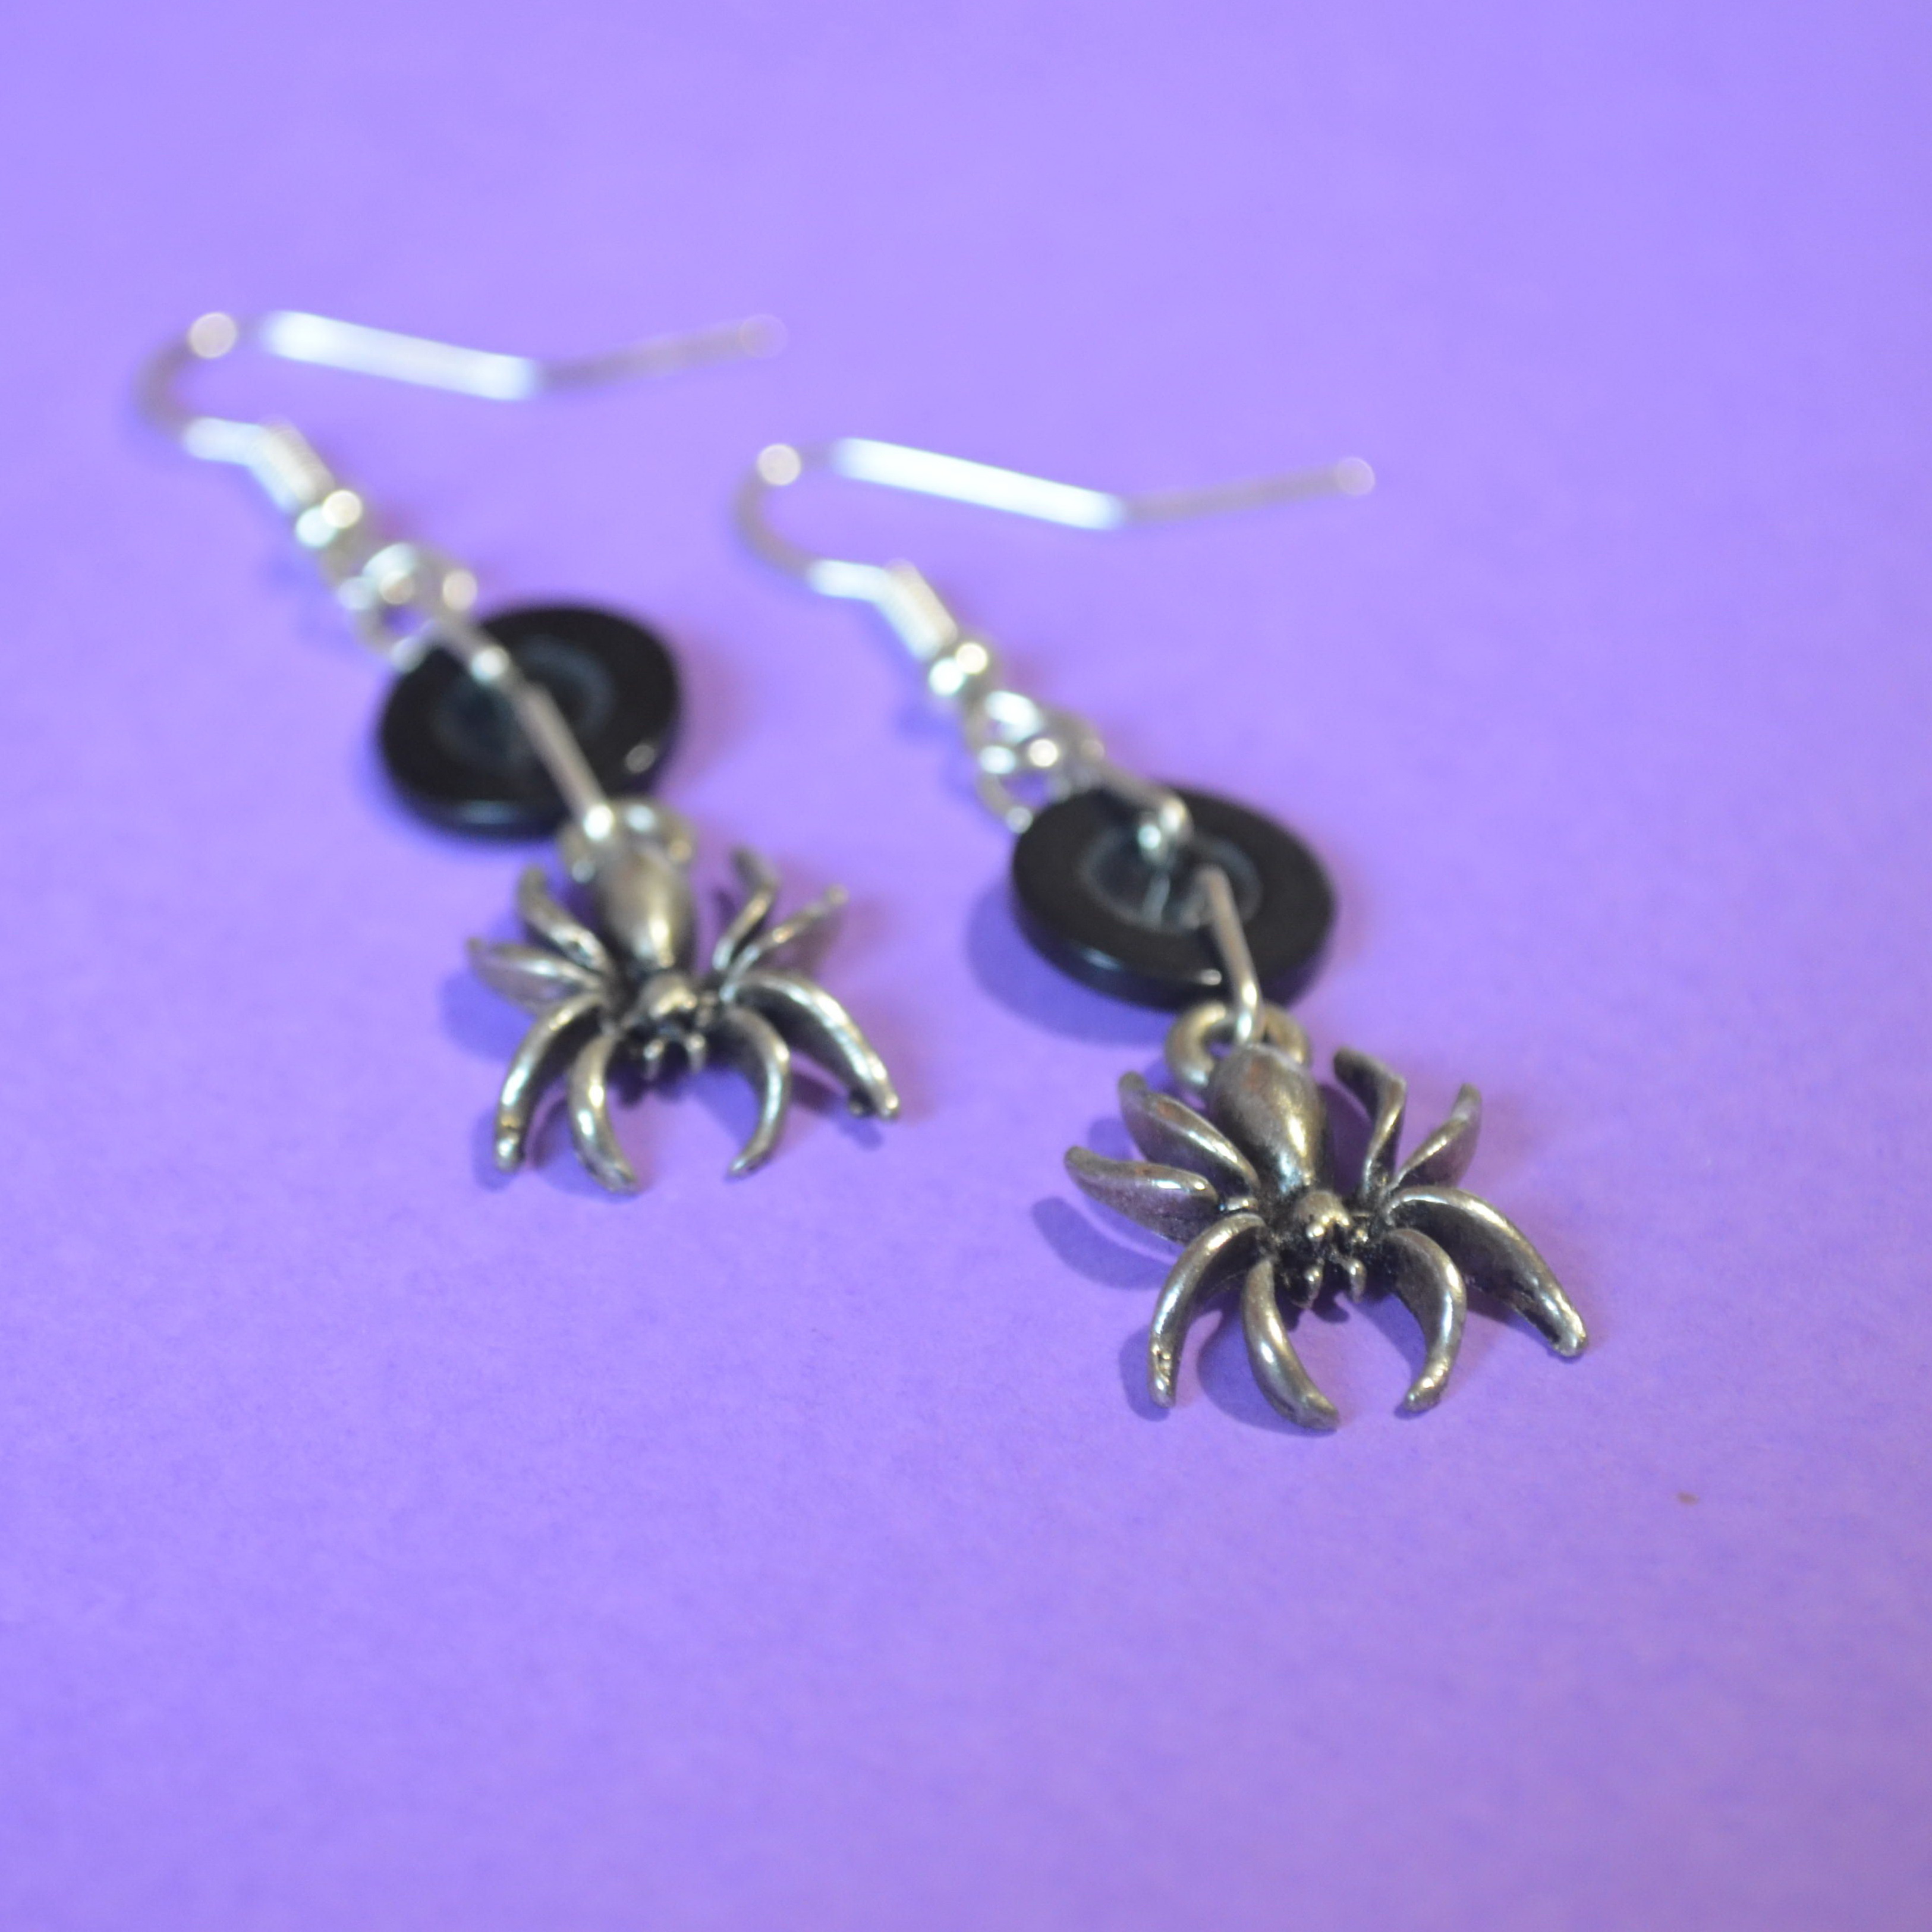 Spider One Button Charm Earrings